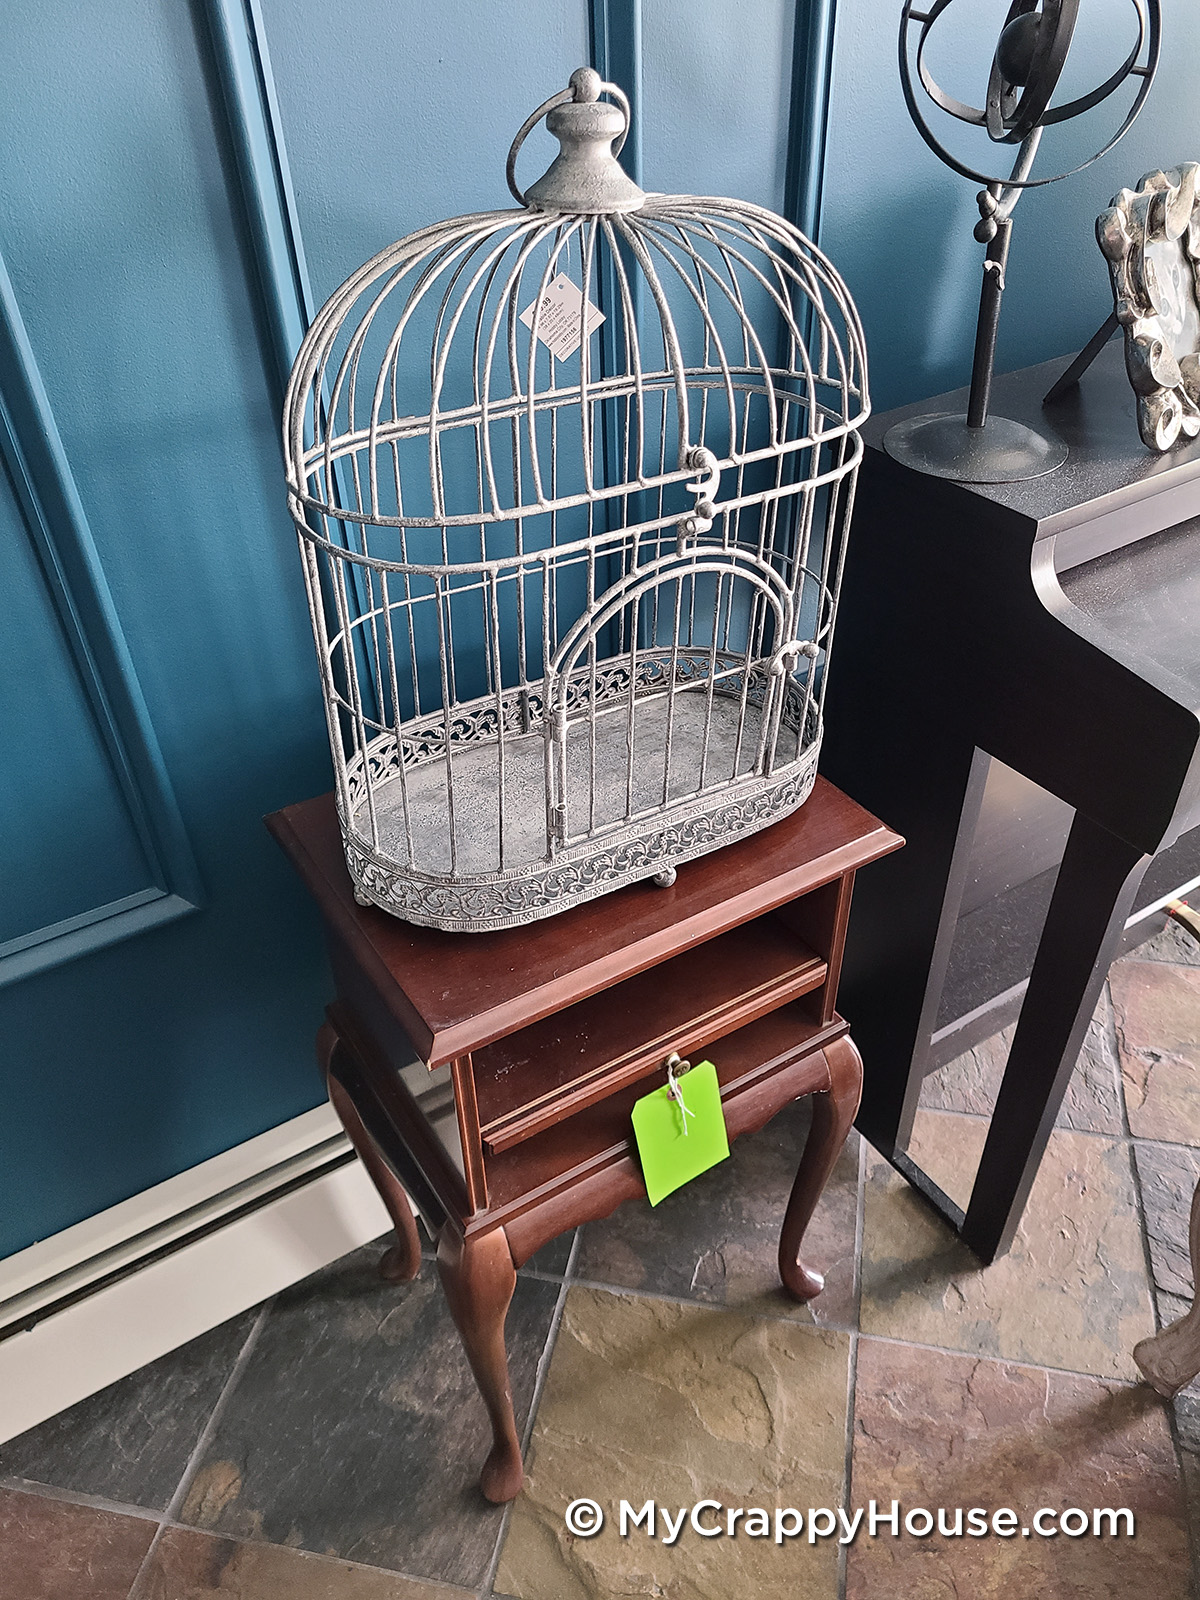 Little table with birdcage on it